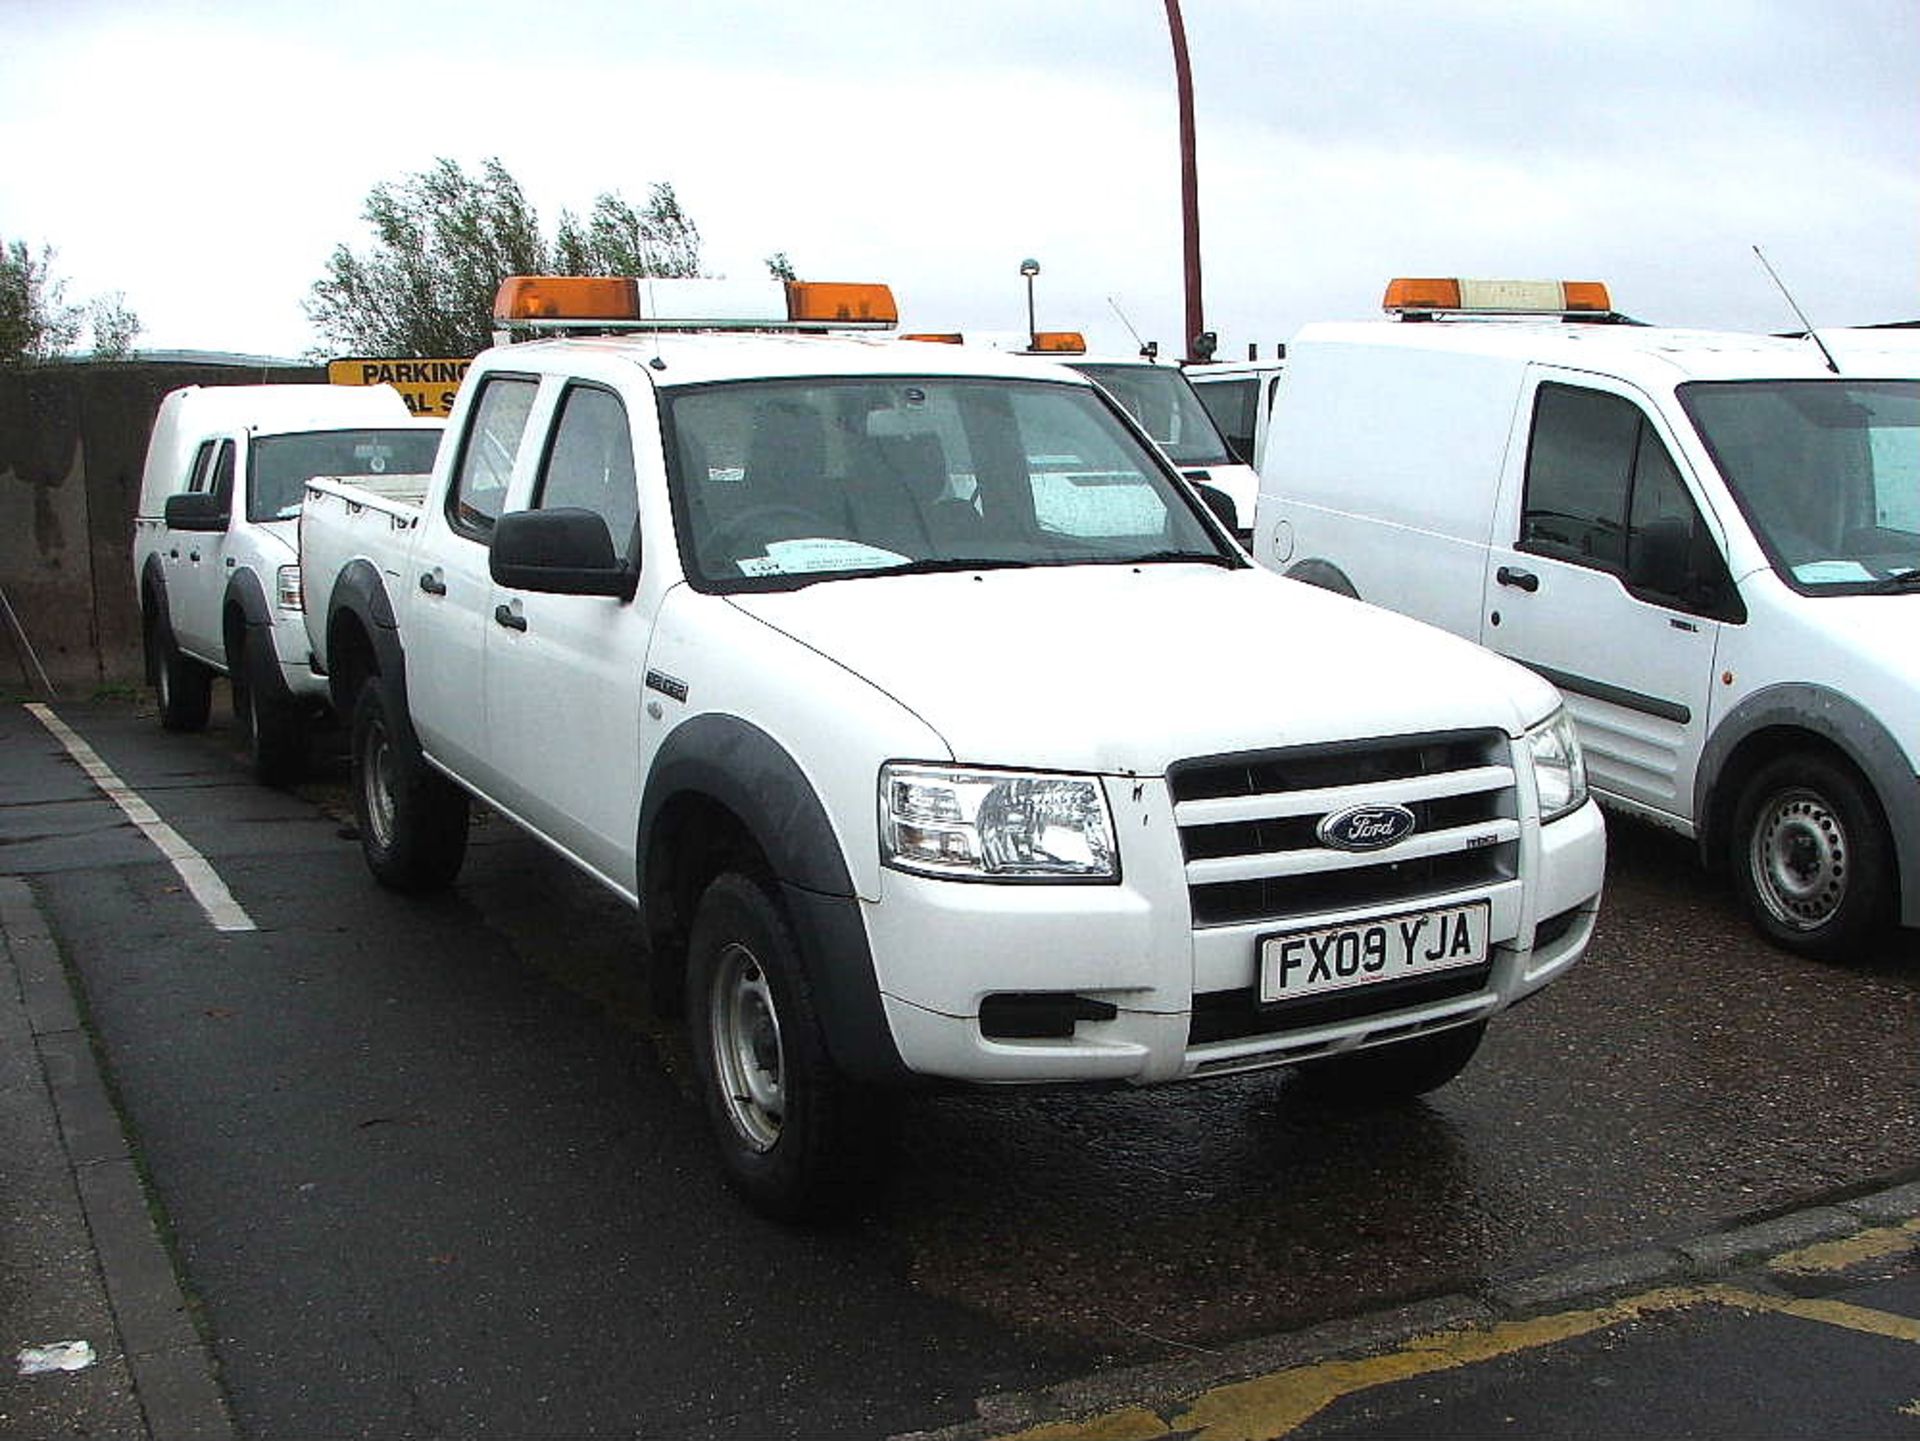 WHITE FORD RANGER TDCI OPEN BACK 4 X 4 TWIN CAB PICK UP TRUCK WITH TOW BALL & ROOF LIGHT 09 PLATE